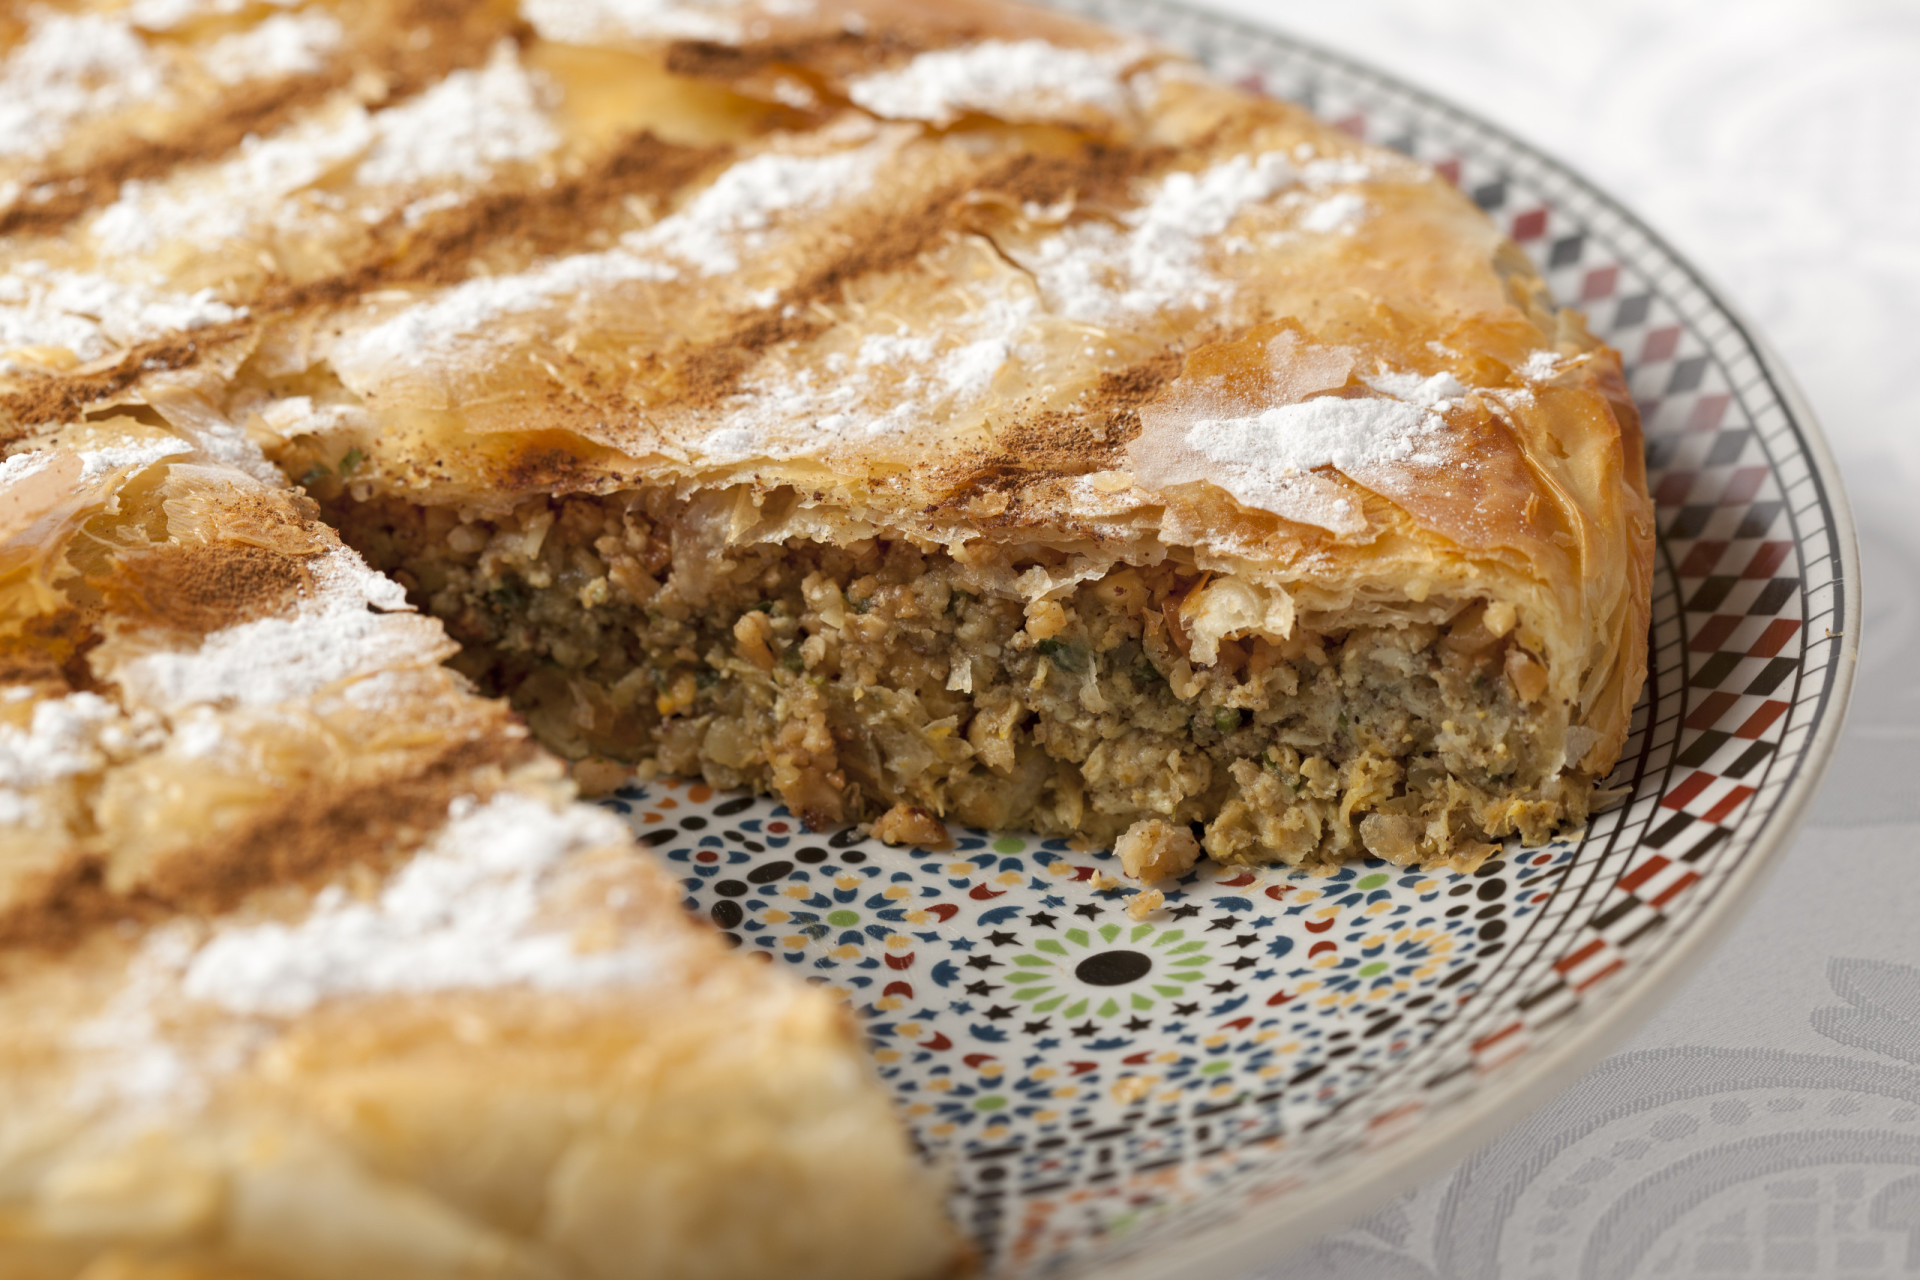 <p><span>Pastilla, or bastilla, is a savory pie made with warqa dough, similar to filo pastry. The pie </span><span>is filled</span><span> with a sweet and </span><span>savory</span><span> mixture of pigeon or chicken, almonds, and spices.</span></p><p><a href="https://www.msn.com/en-us/community/channel/vid-7xx8mnucu55yw63we9va2gwr7uihbxwc68fxqp25x6tg4ftibpra?cvid=94631541bc0f4f89bfd59158d696ad7e">Follow us and access great exclusive content every day</a></p>